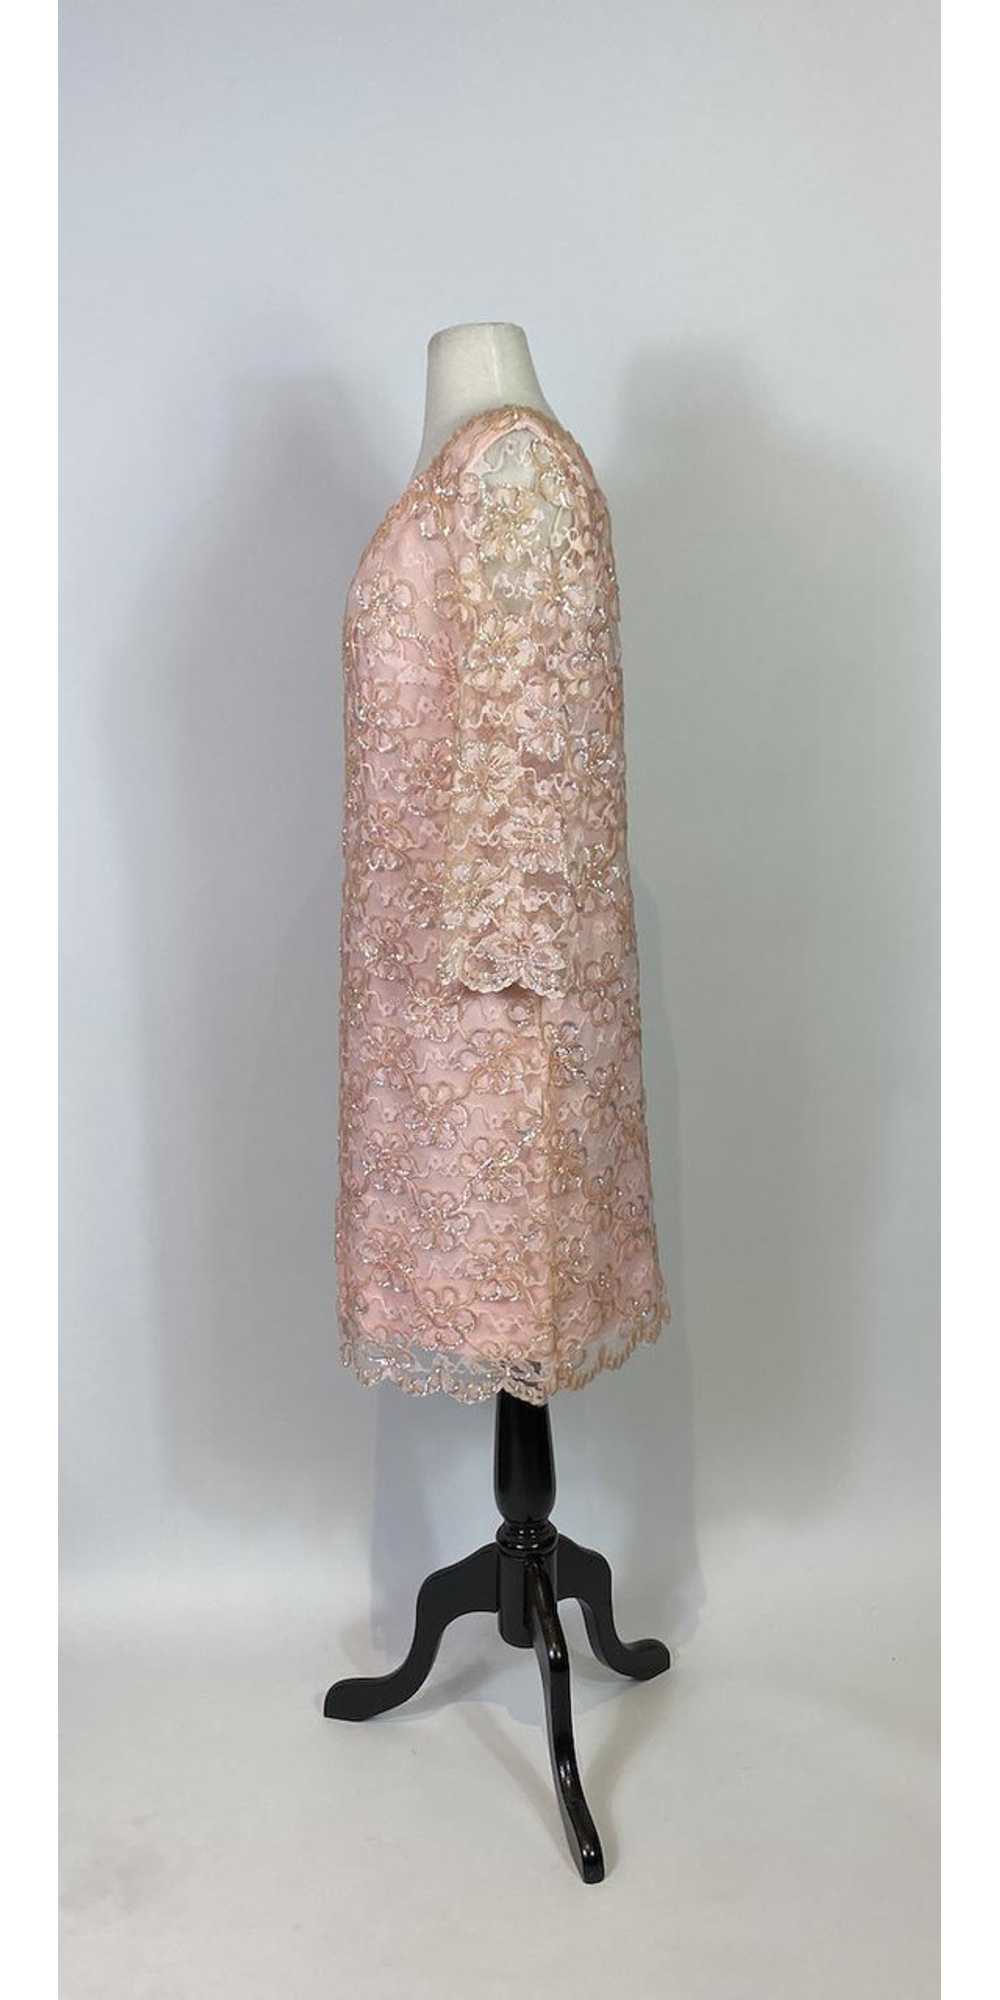 1960s Jr. Theme Pink Sequin and Lace Shift Dress - image 4